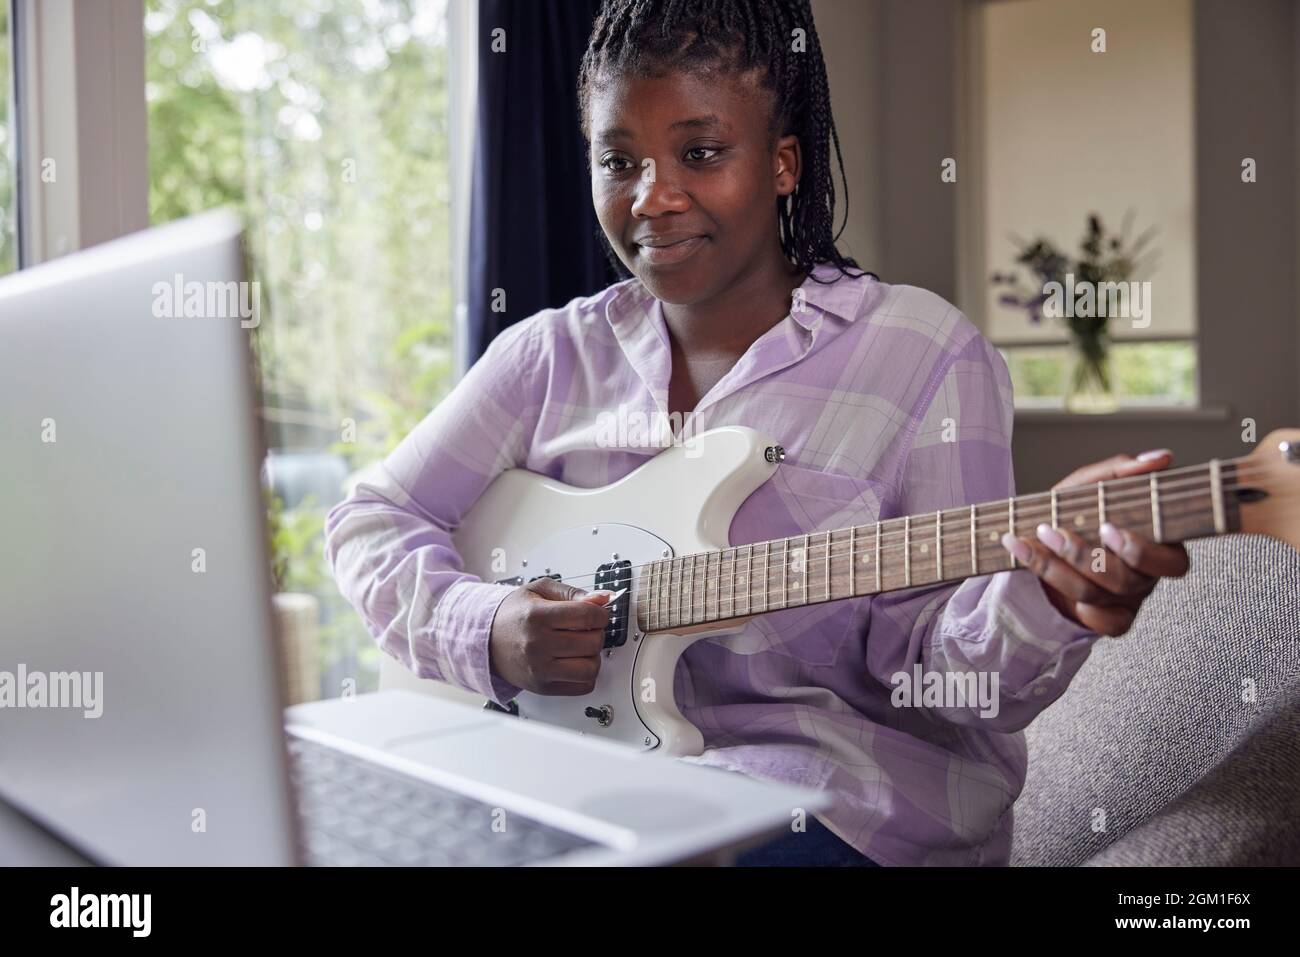 Teenage Girl At Home Learning To Play Electric Guitar With Online Lesson On  Laptop Computer Stock Photo - Alamy